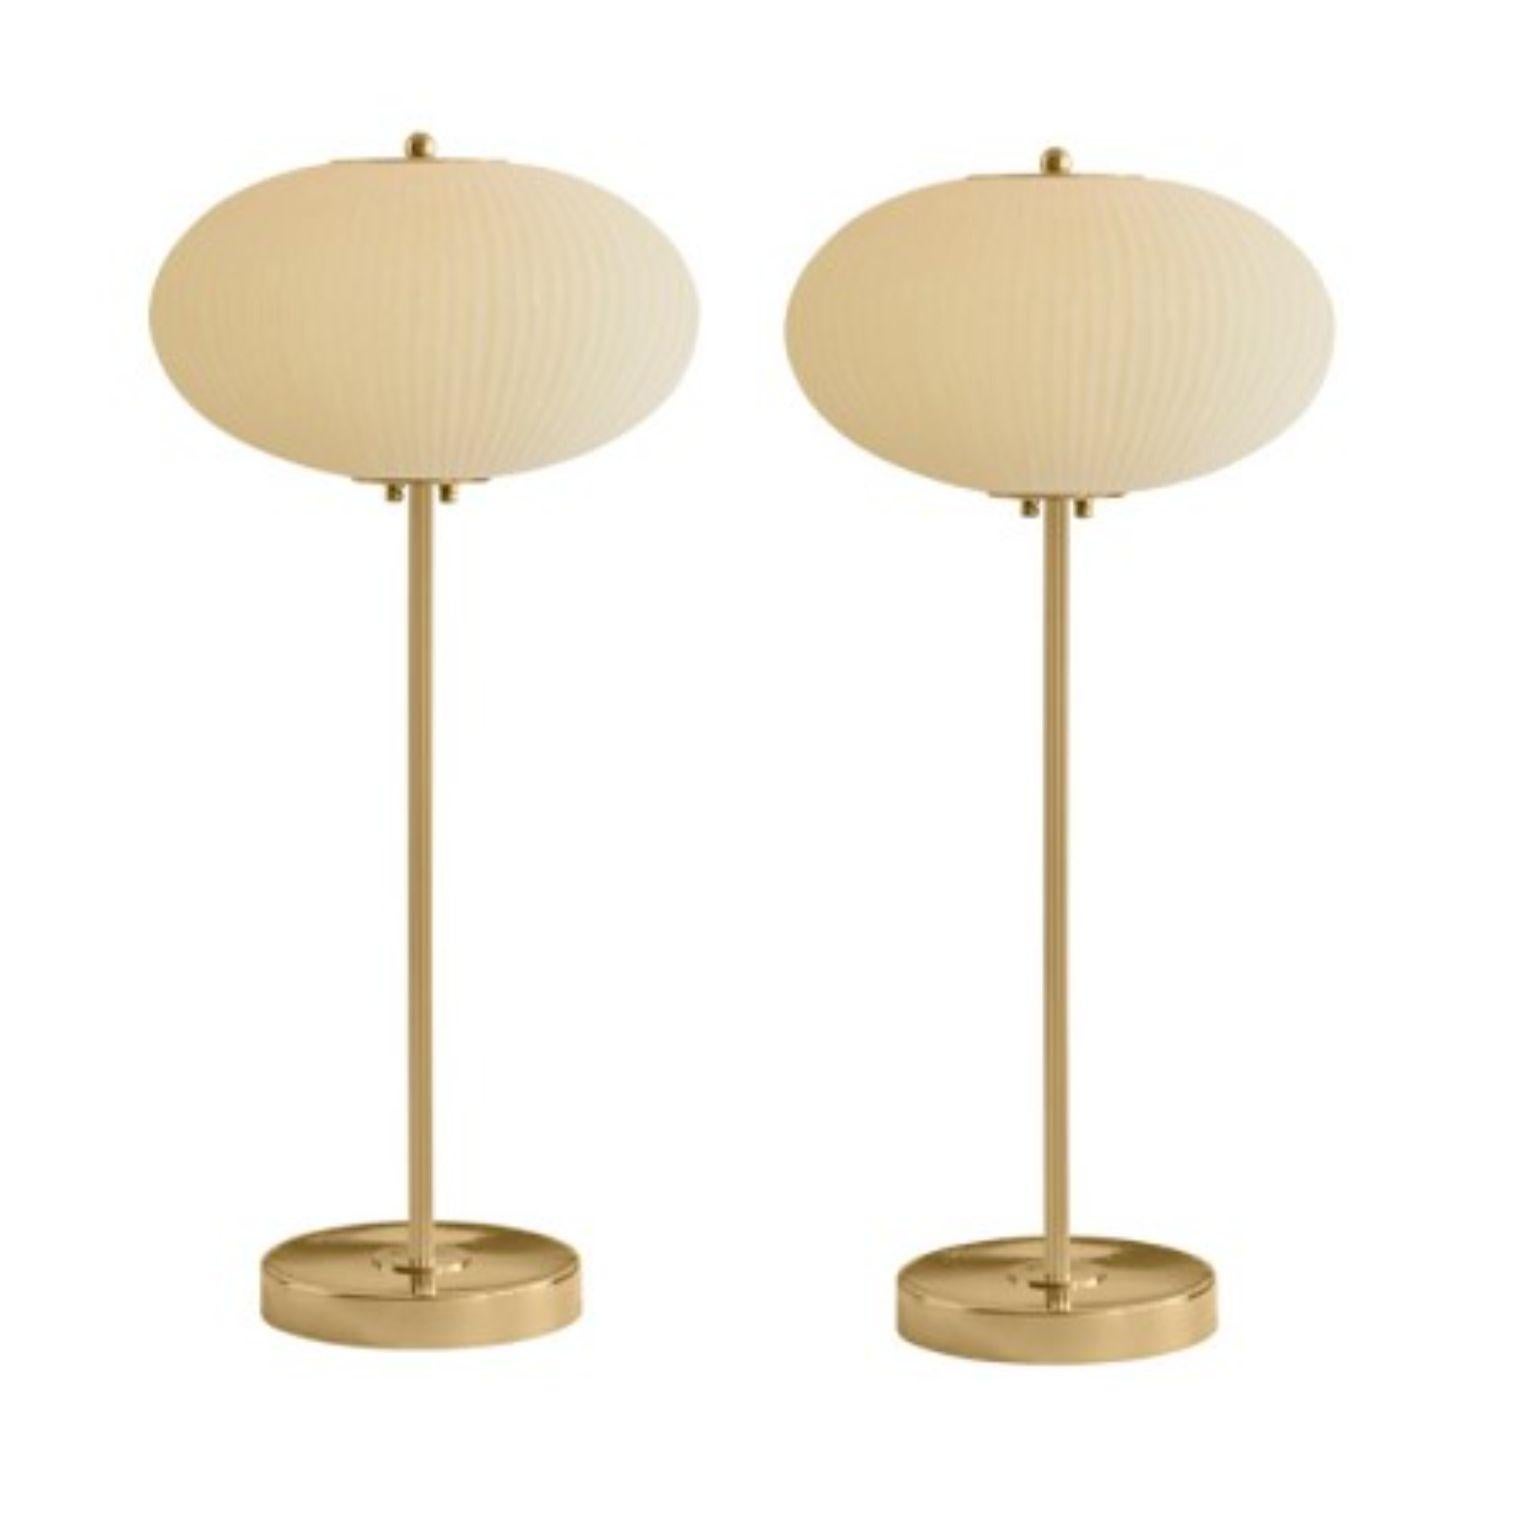 Table lamp China 07 by Magic Circus Editions
Dimensions: H 70 x W 32 x D 32 cm
Materials: Brass, mouth blown glass sculpted with a diamond saw
Colour: mustard yellow

Available finishes: Brass, nickel
Available colours: enamel soft white, soft